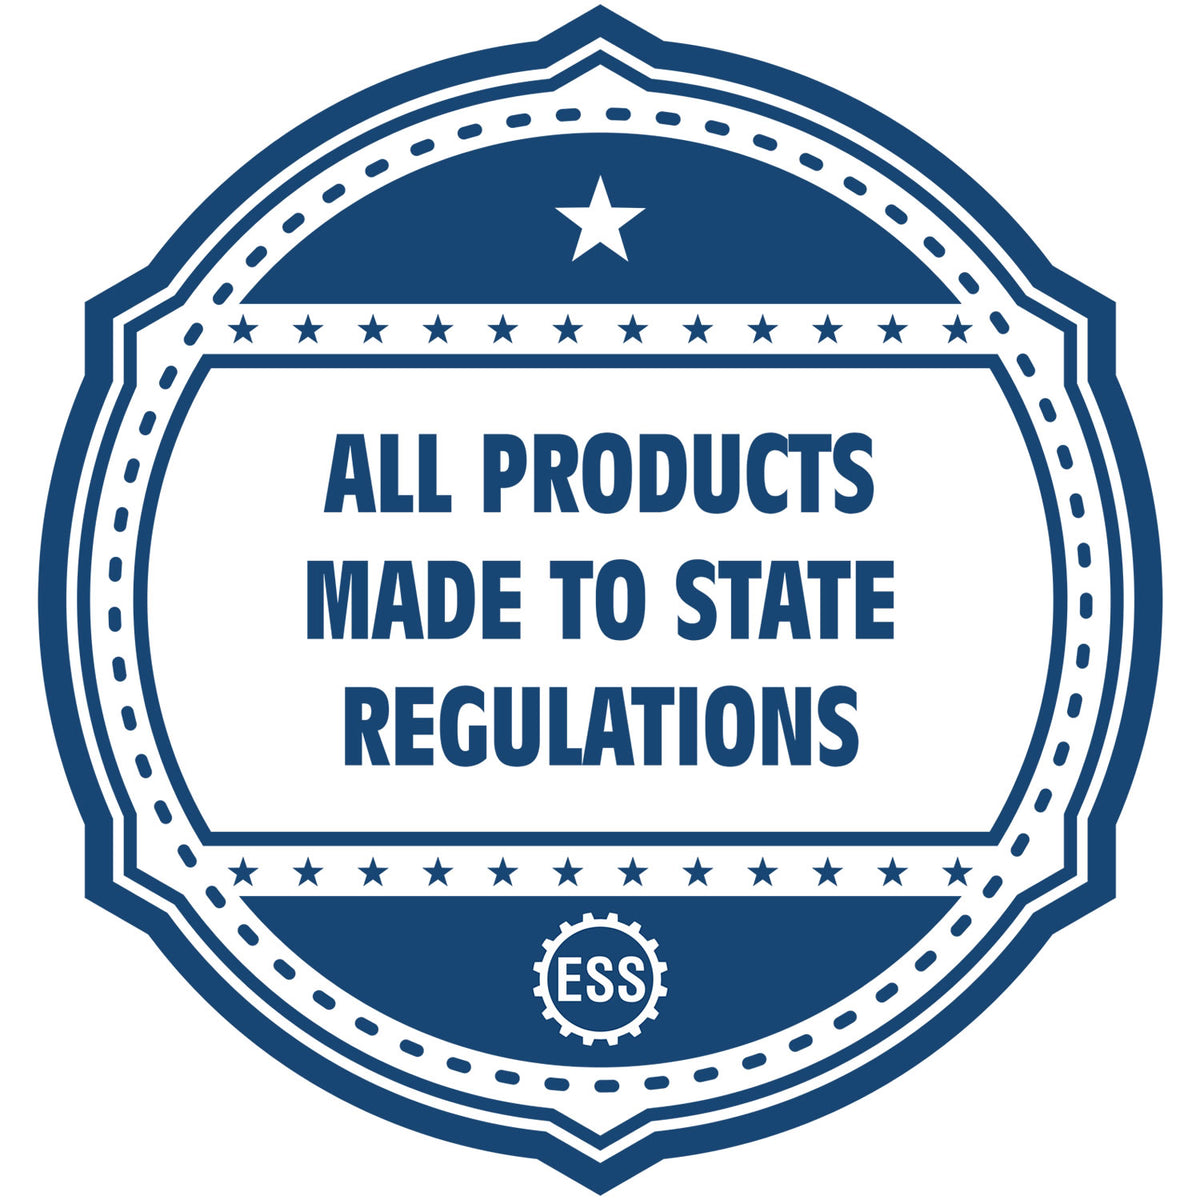 An icon or badge element for the Self-Inking State Seal Wisconsin Notary Stamp showing that this product is made in compliance with state regulations.